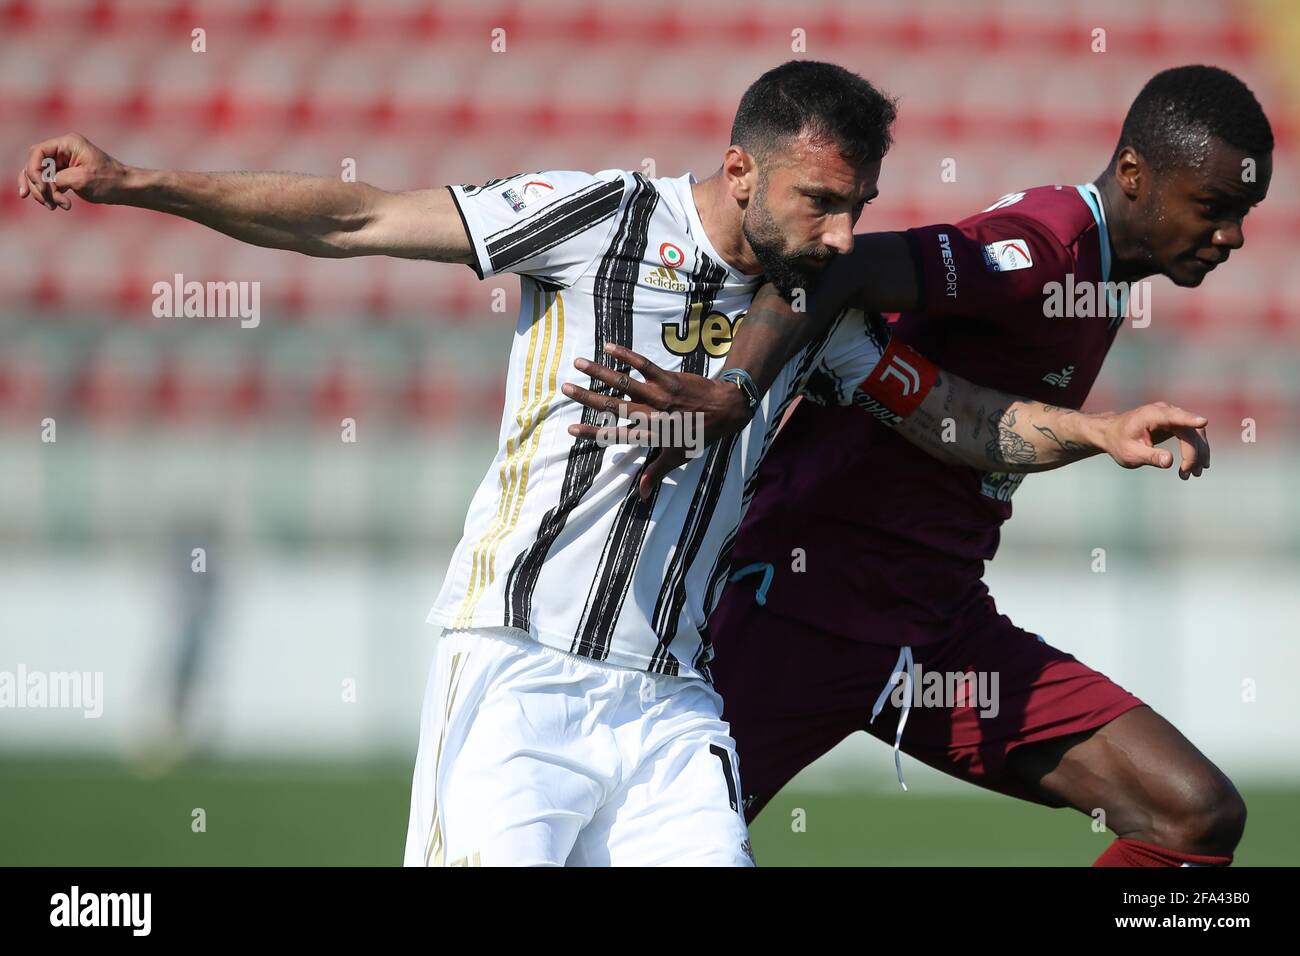 Alessandria, Italy. 22nd Apr, 2021. Raffaele Alcibiade of Juventus appears  to receive an elbow in the throat from King Udoh of Olbia Calcio during the  Serie C match at Stadio Giuseppe Moccagatta -